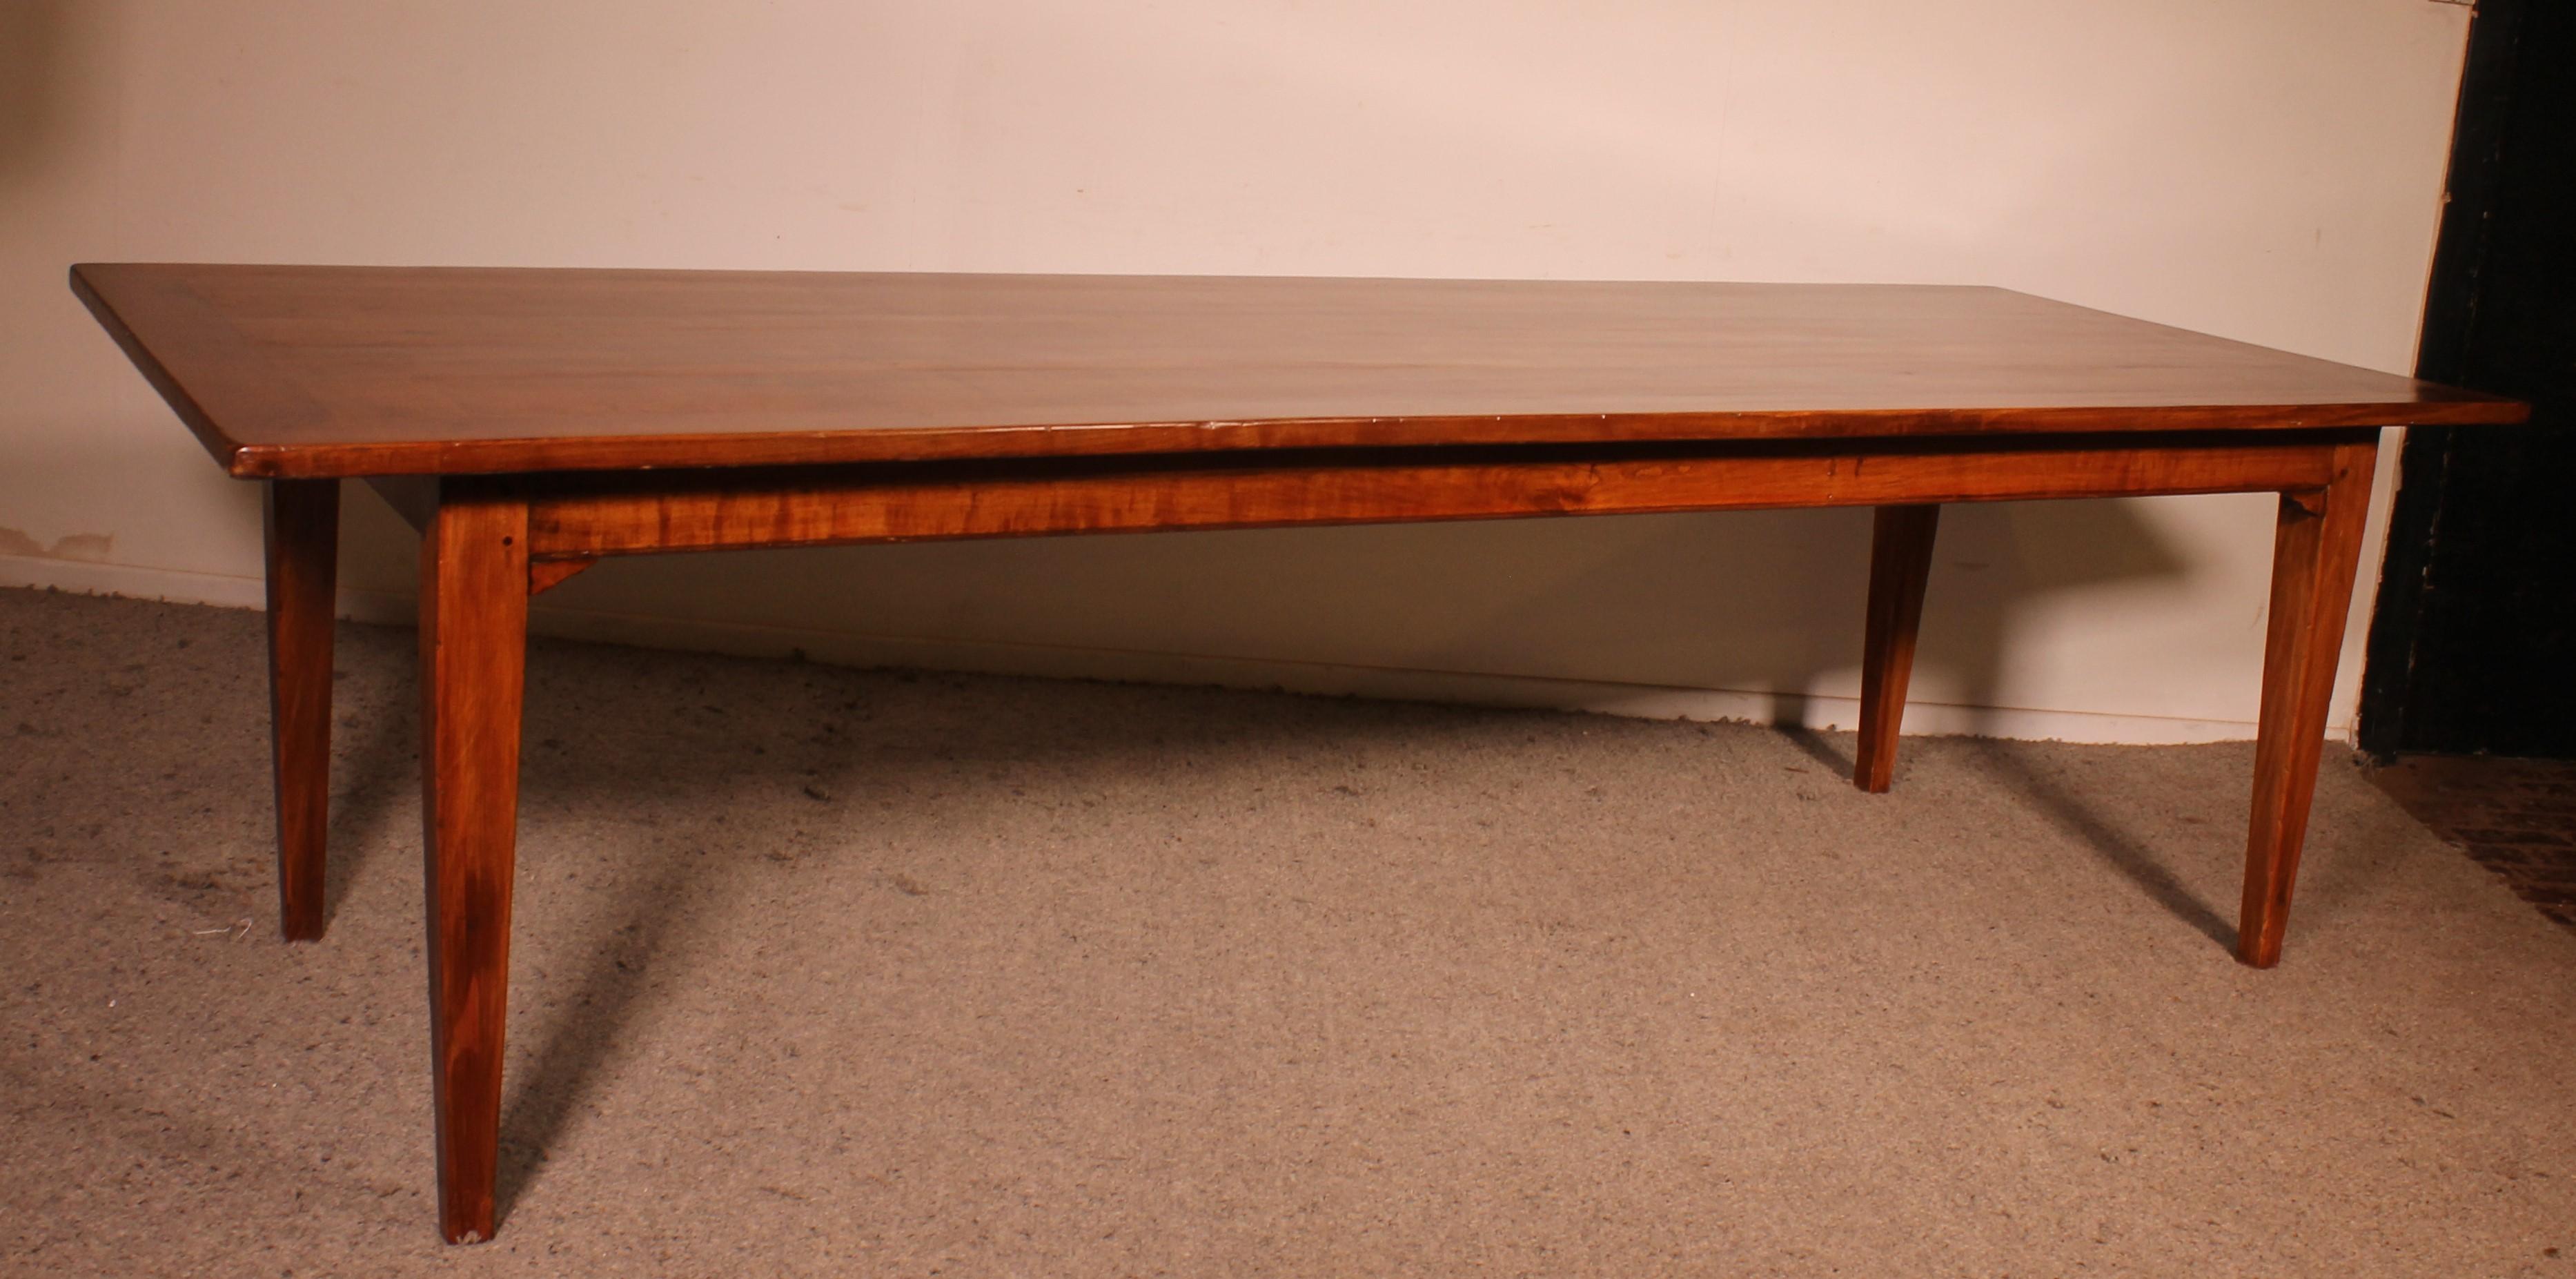 Large 19th Century Cherry Wood Refectory Table With A Width Of 100cm For Sale 7